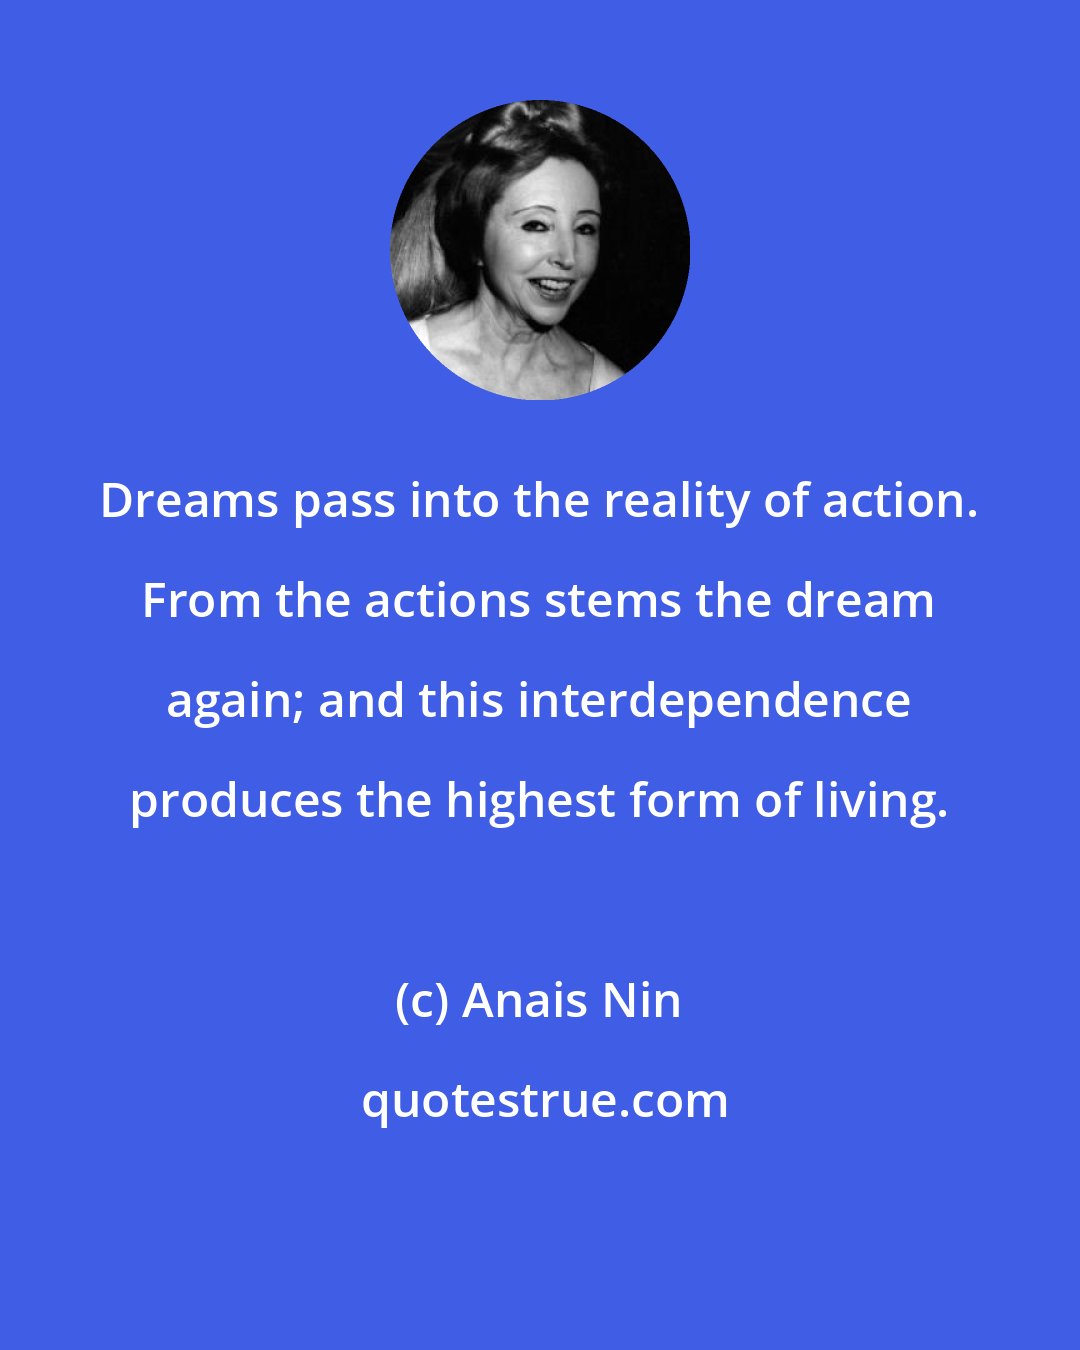 Anais Nin: Dreams pass into the reality of action. From the actions stems the dream again; and this interdependence produces the highest form of living.